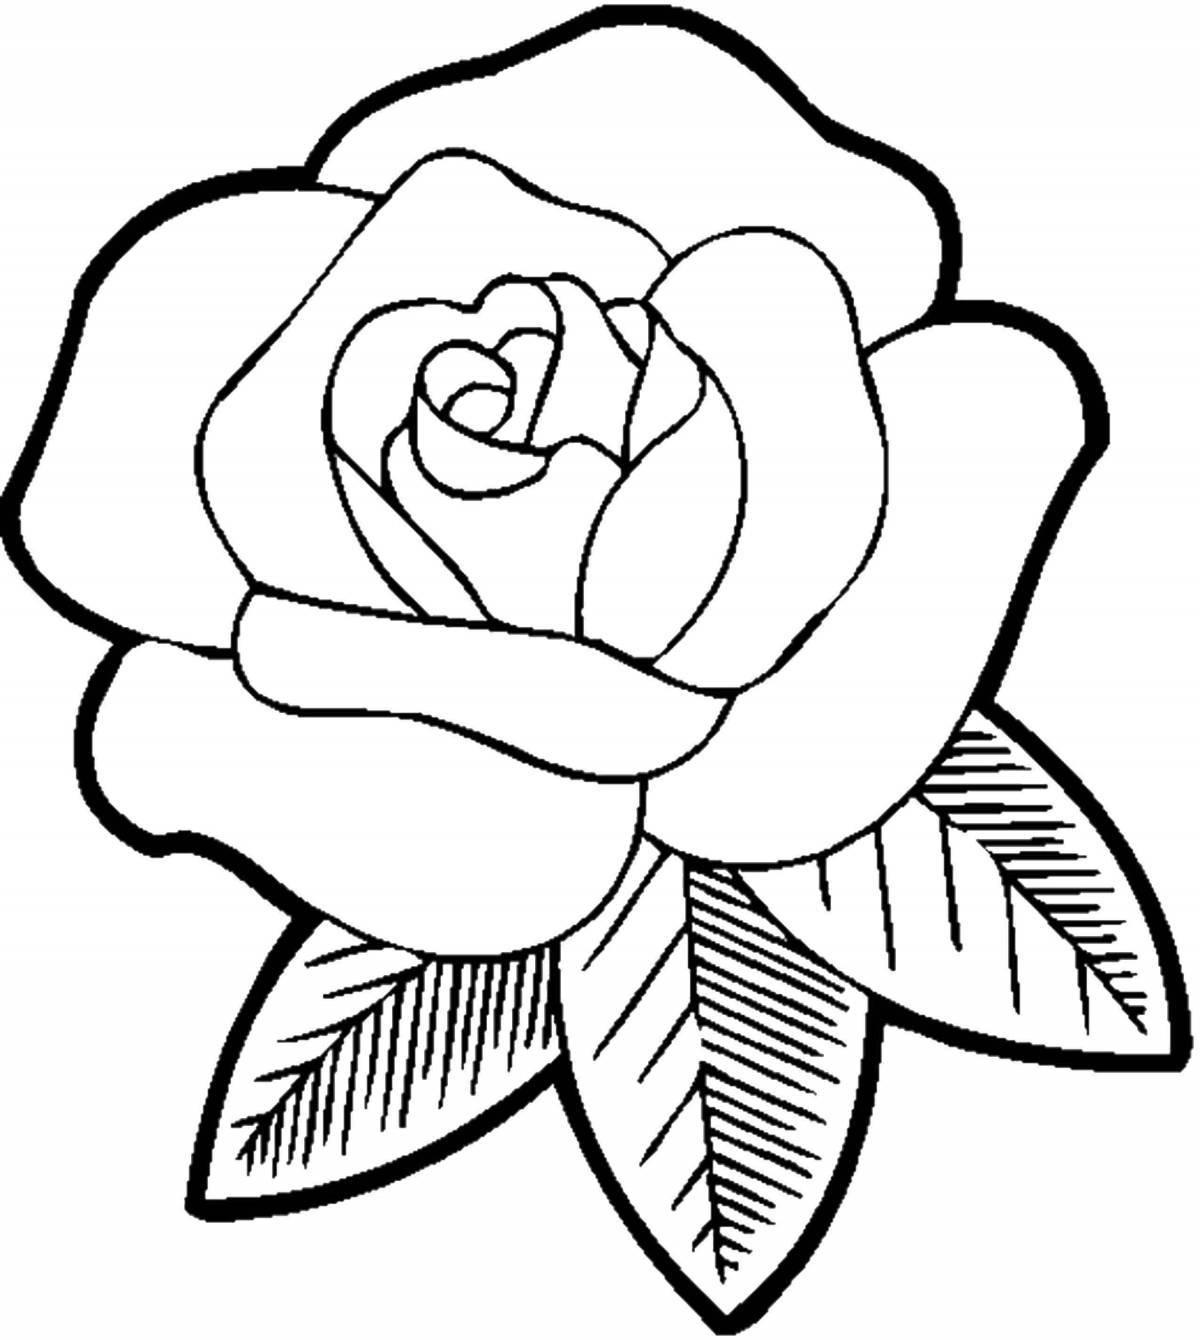 Раскраска цветы крупные | Adult coloring pages, Coloring pages, Flower coloring pages